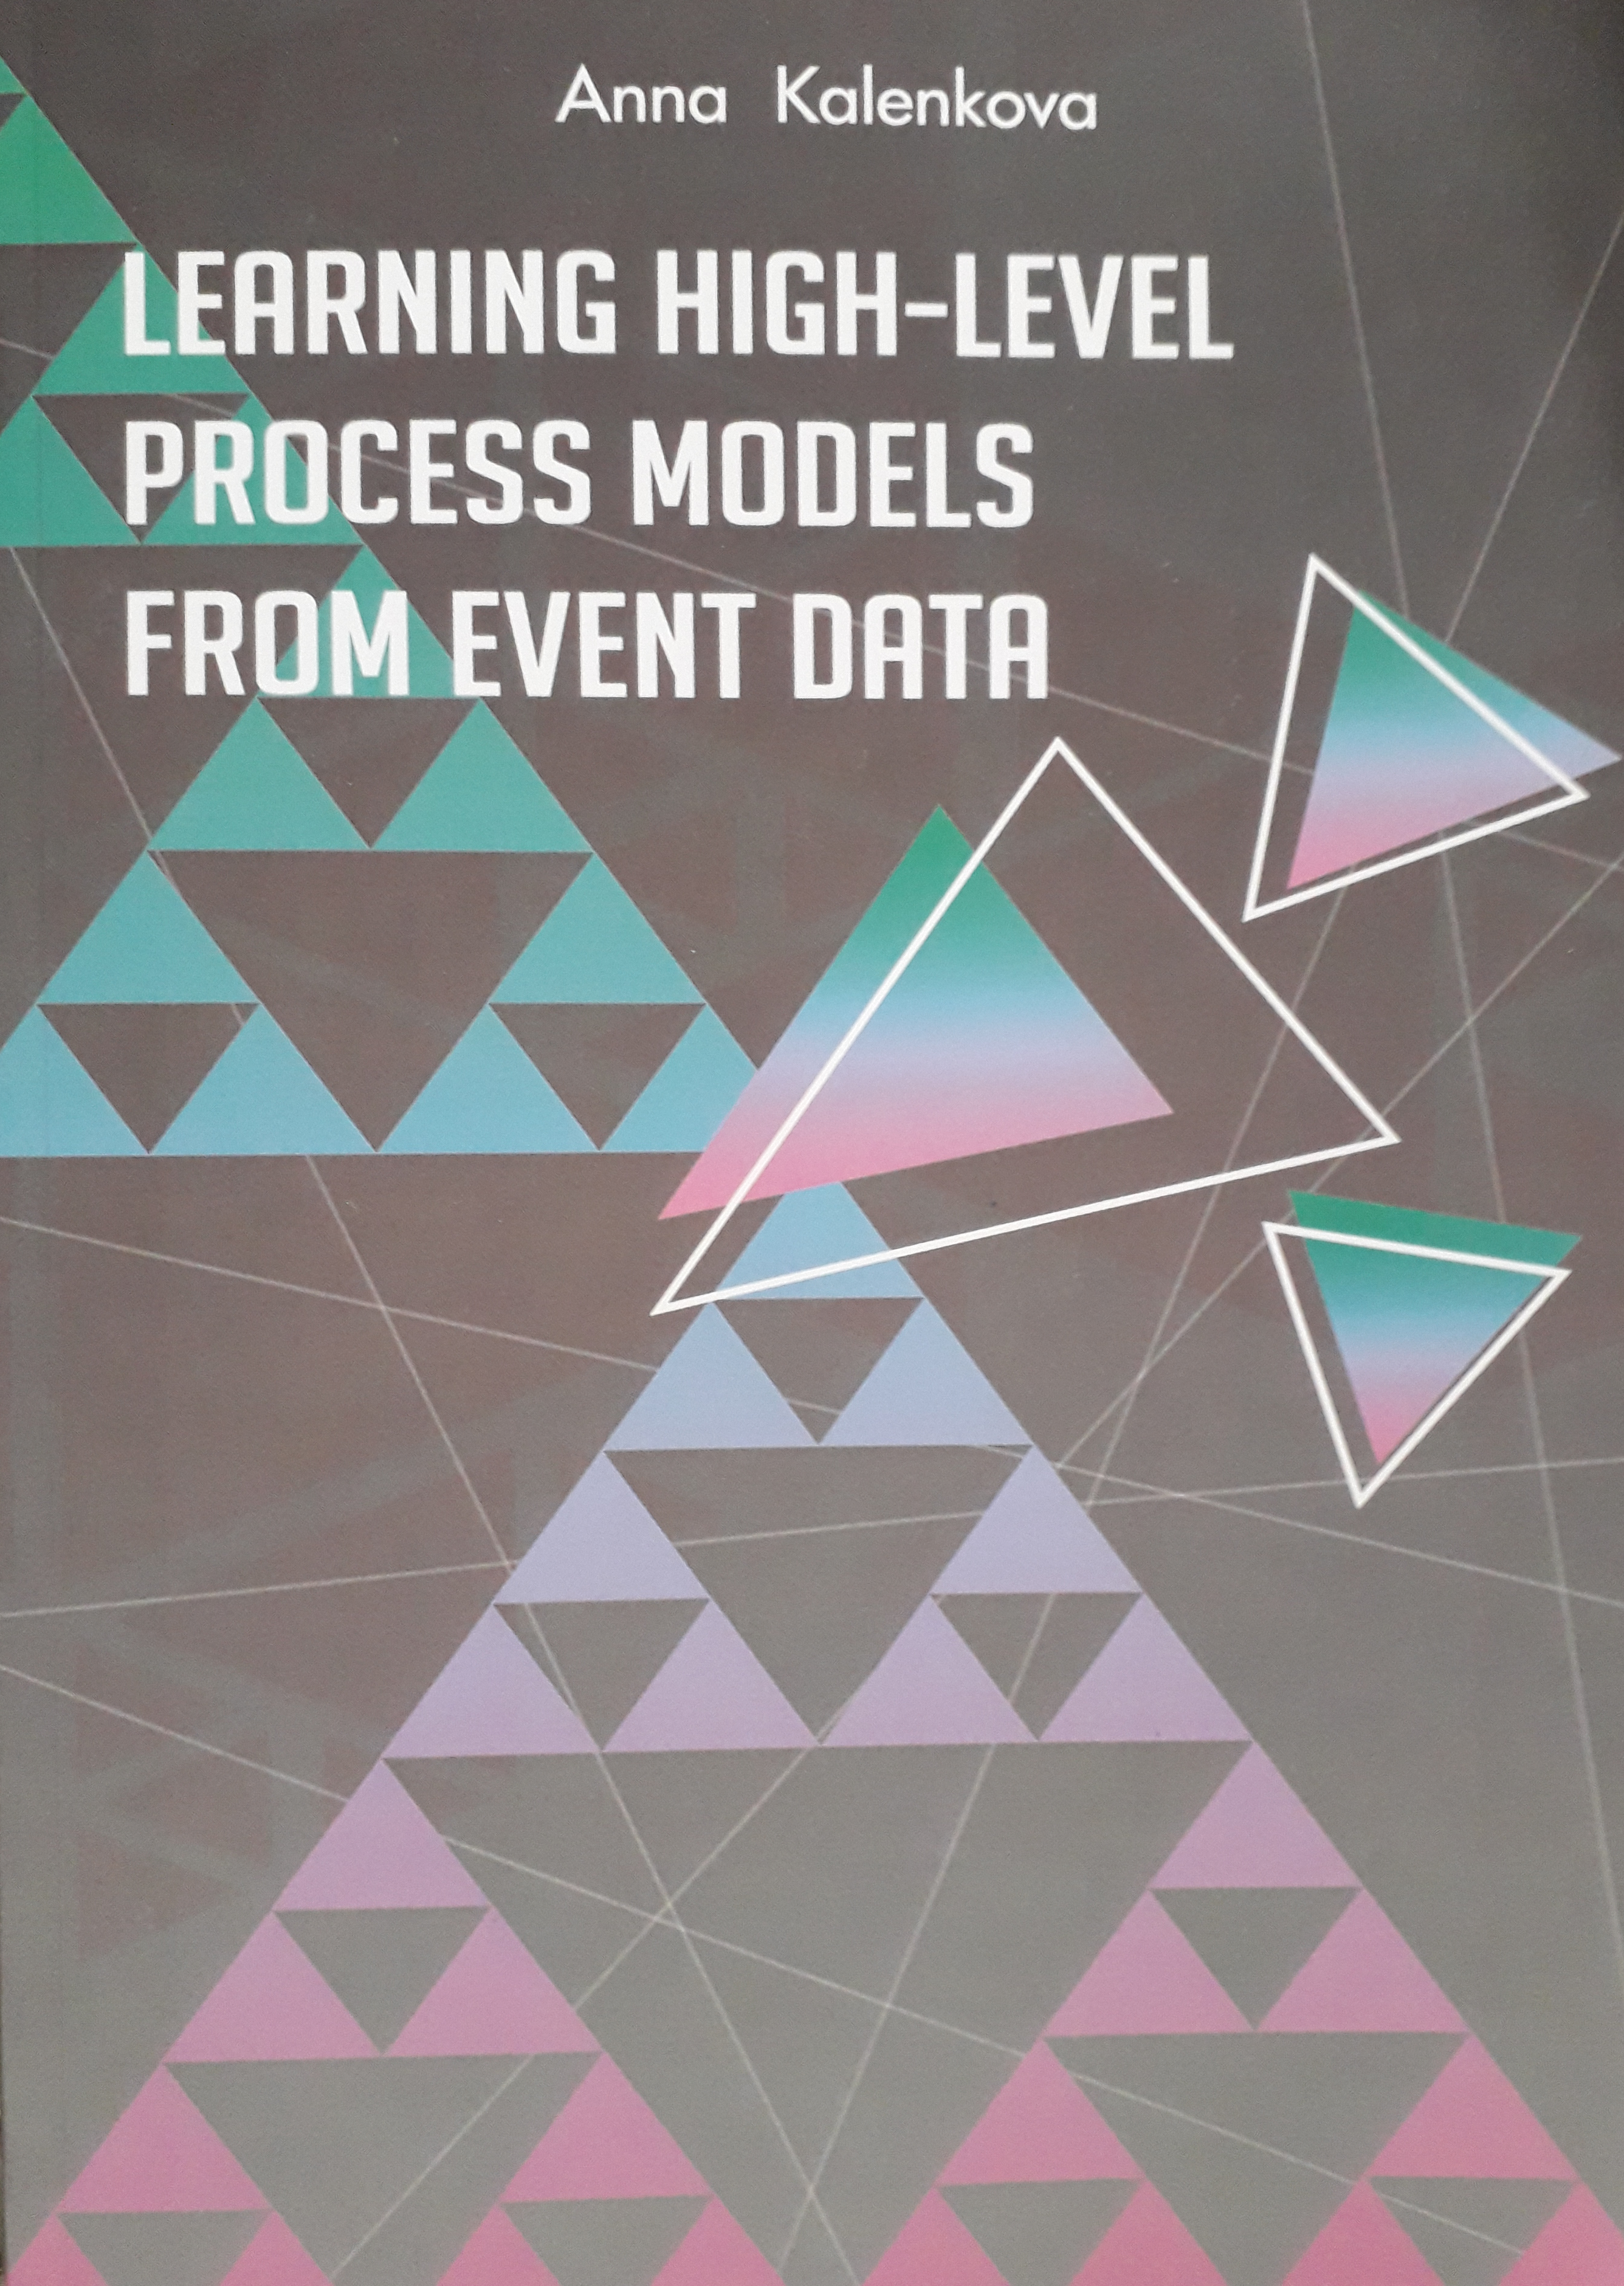 'Learning high-level process models from event data', Doctor of Philosophy, Department of Mathematics and Computer Science